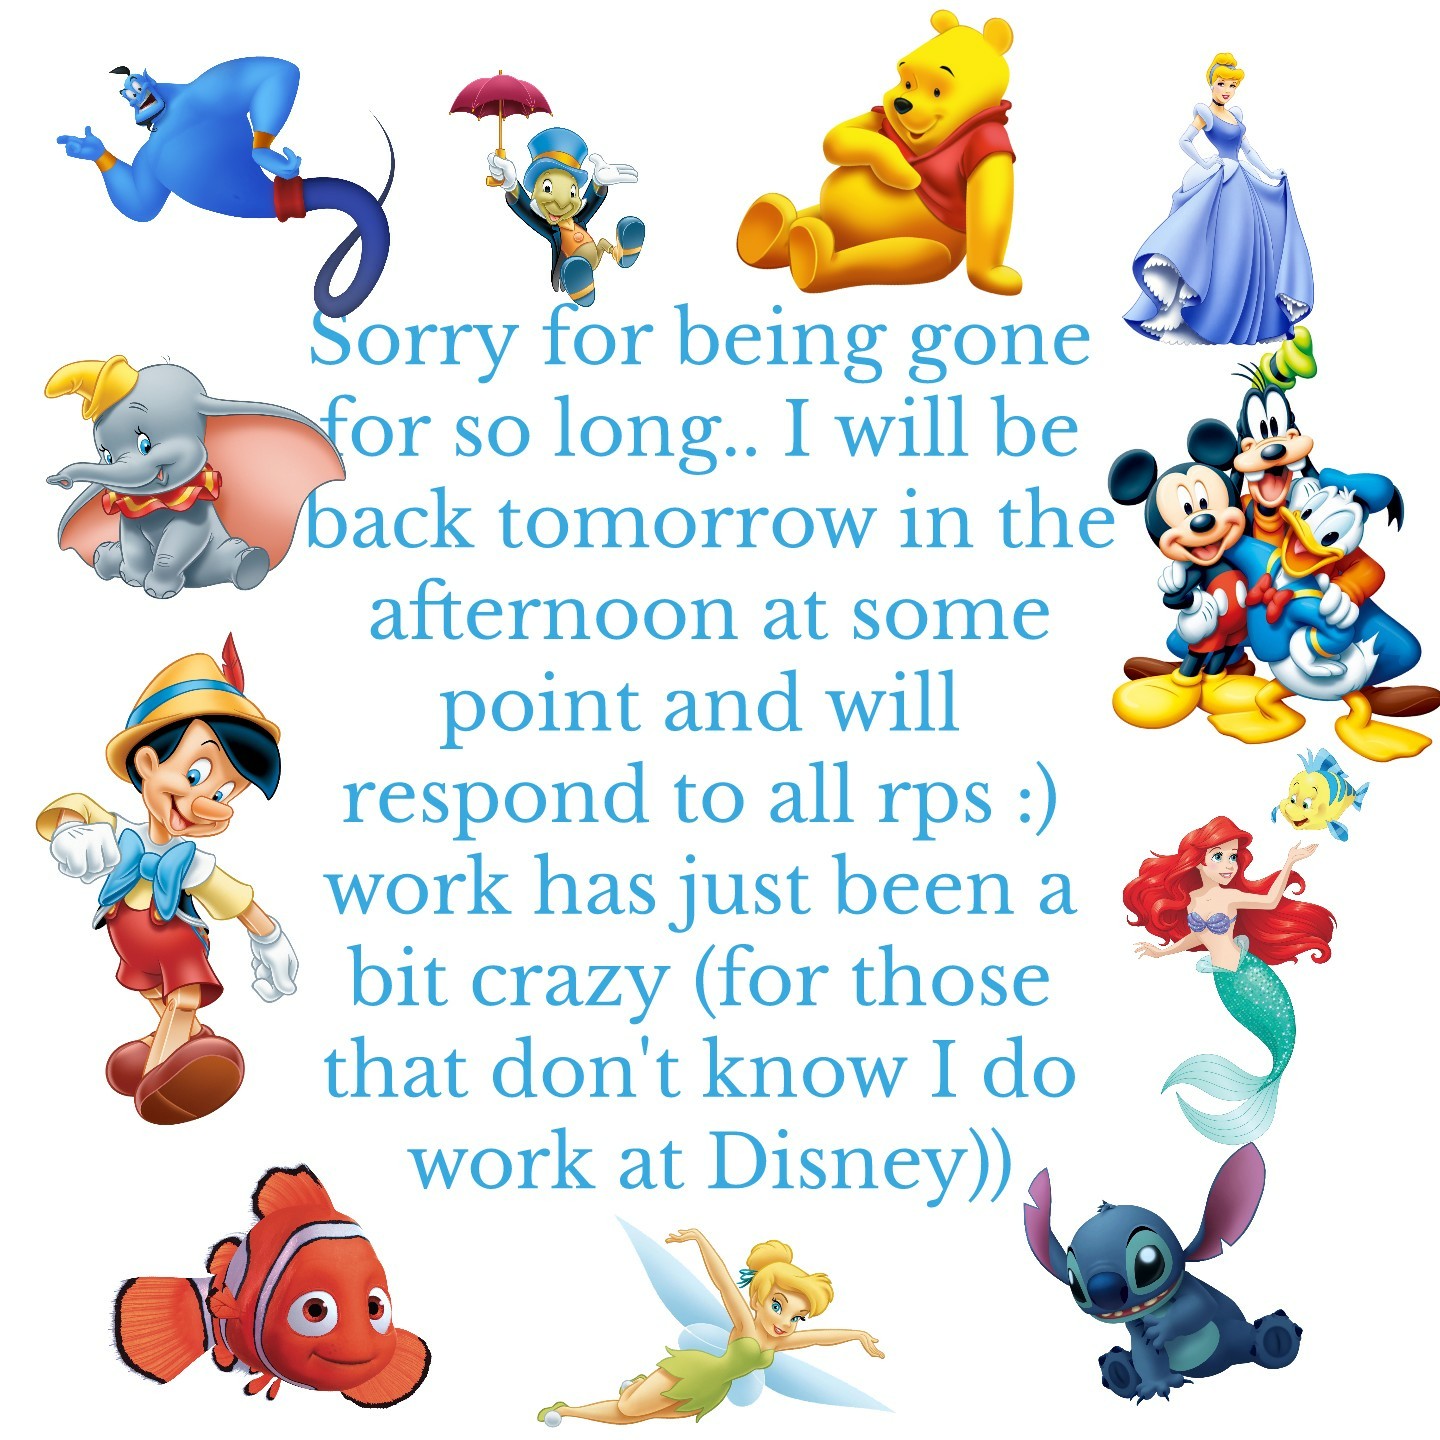 Sorry for being gone for so long.. I will be back tomorrow in the afternoon at some point and will respond to all rps :) work has just been a bit crazy (for those that don't know I do work at Disney))